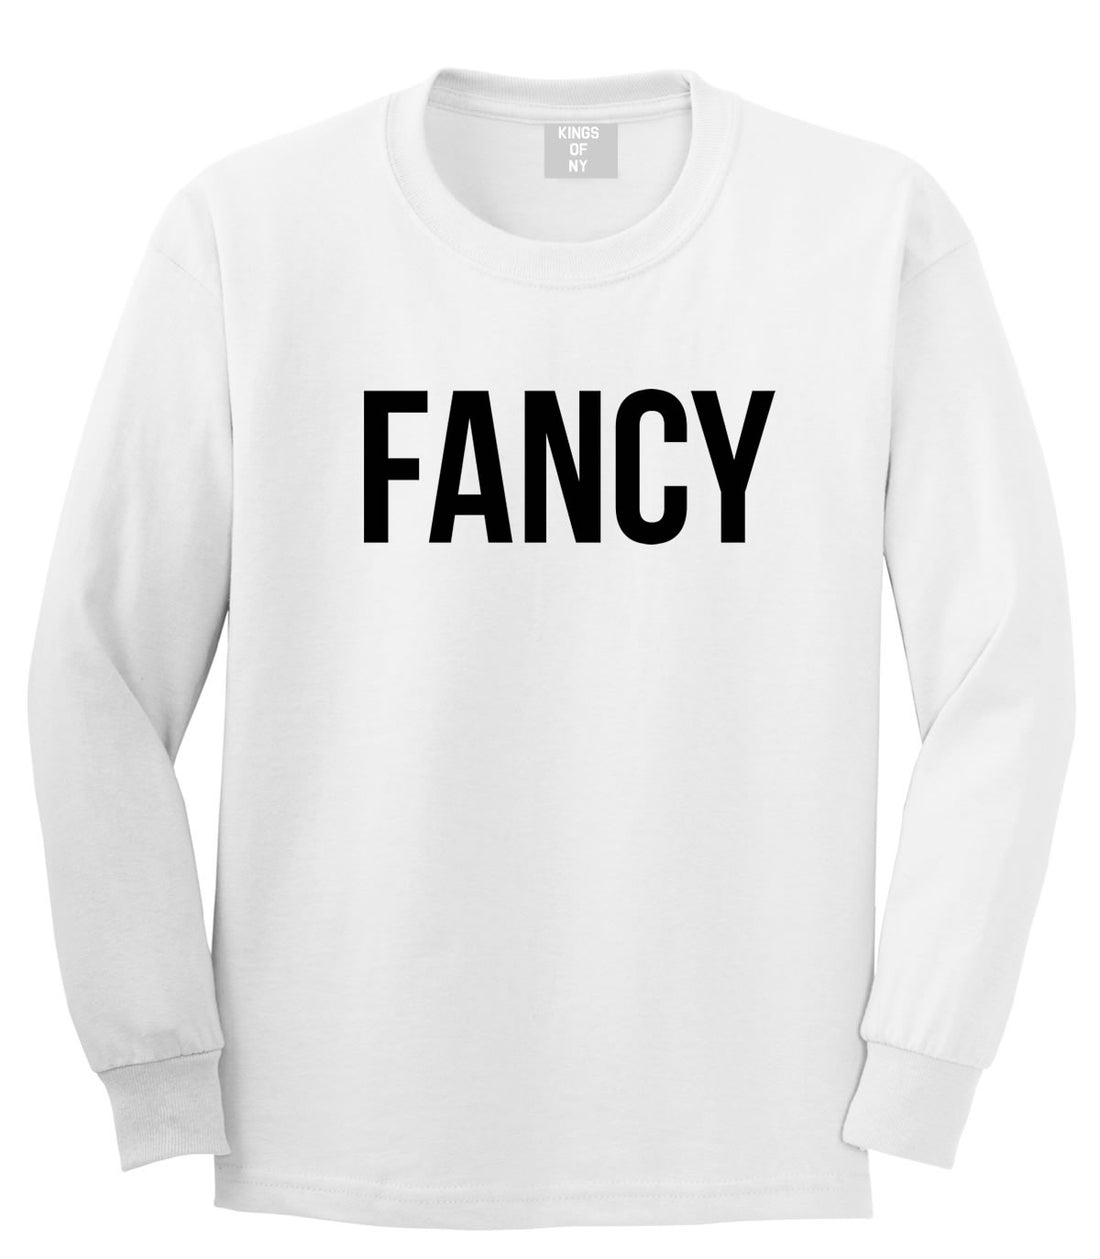 Fancy Long Sleeve T-Shirt in White by Kings Of NY